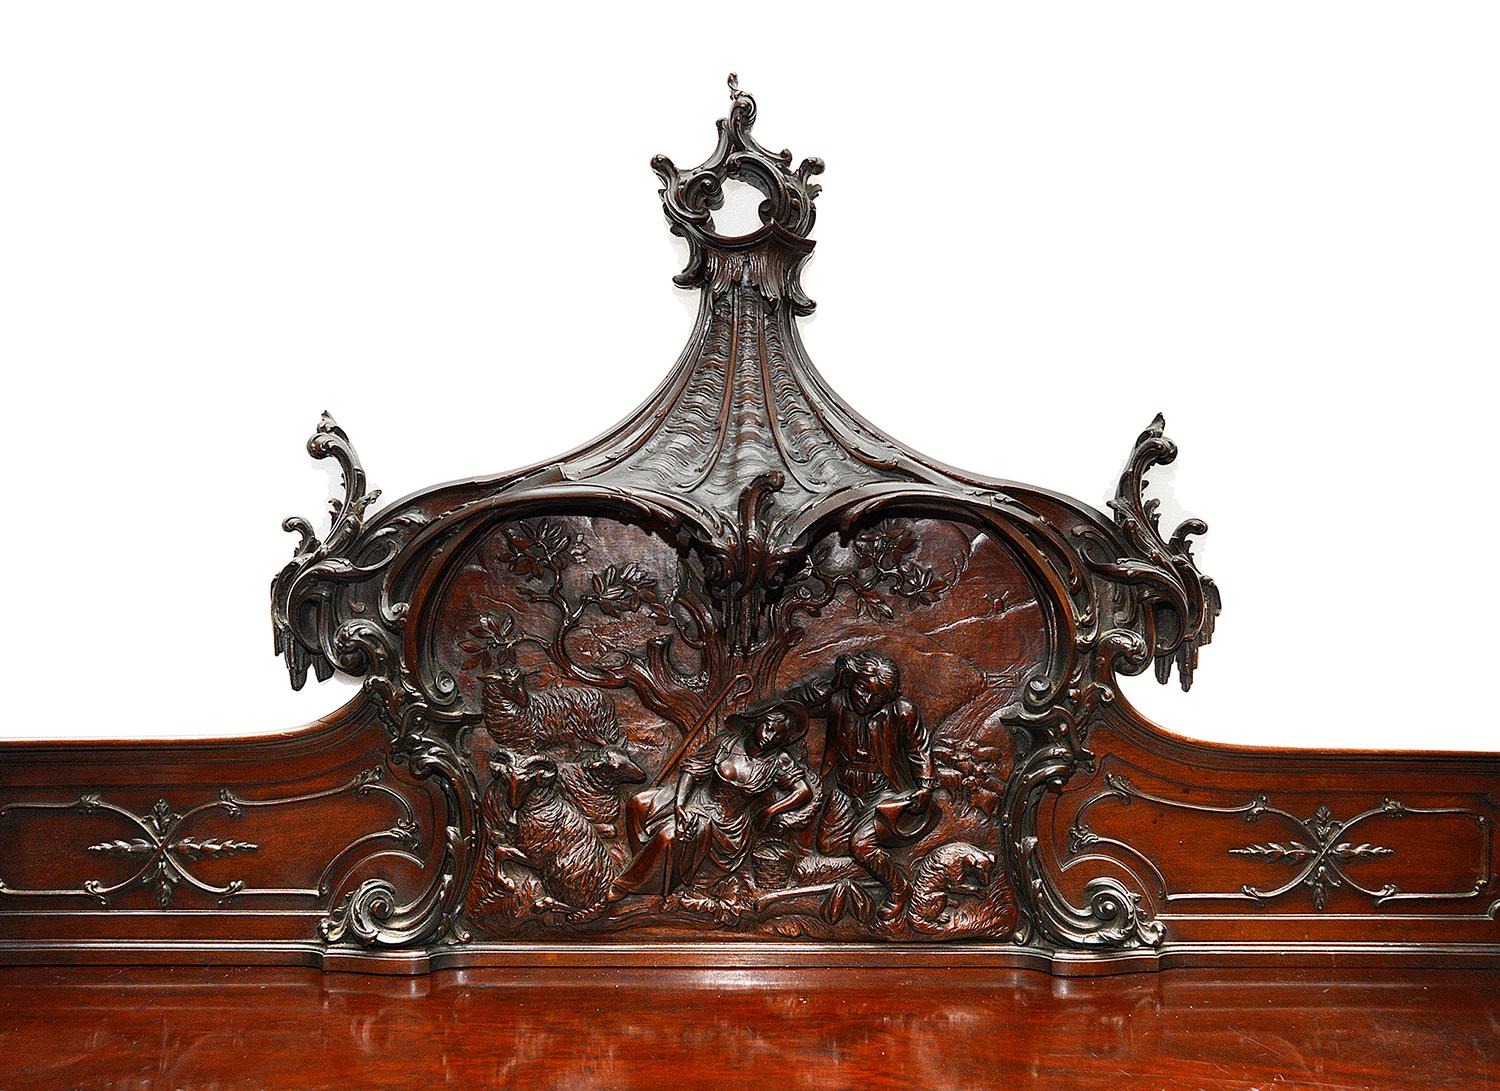 A Magnificent Chinese Chippendale style mahogany sideboard, having carved scrolling pagoda influenced pedestals, a central hand carved scene of a Sheppard and Shepherdess resting under a tree with their flock. Wonderful blind fretwork and scrolling